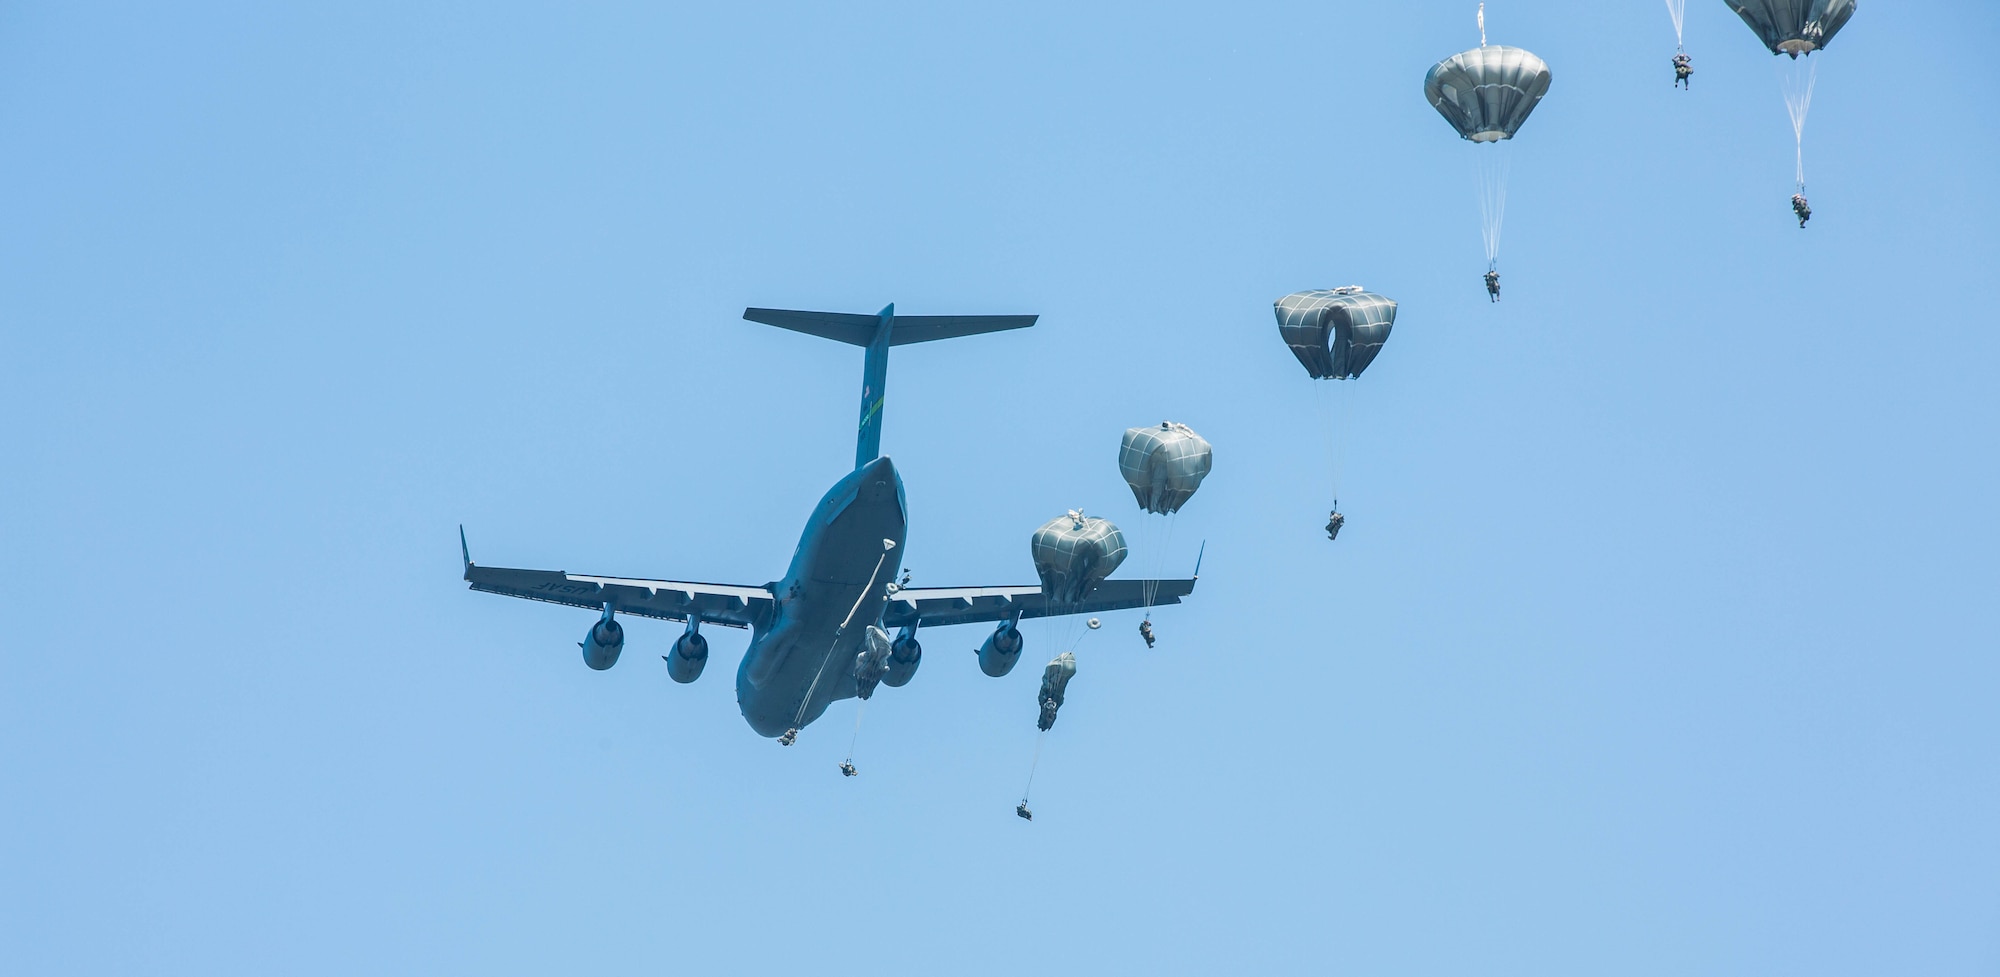 U.S. Army paratroopers, from the 82nd Airborne Infantry Division, jump out of a C-17 Globemaster III during exercise Central Accord 2016 in Gabon, June 20, 2016. The U.S. Army Africa exercise is an annual, combined, joint military exercise that brings together partner nations to practice and demonstrate proficiency in conducting peacekeeping operations. (U.S. Army photo/Spc. Audrequez Evans)